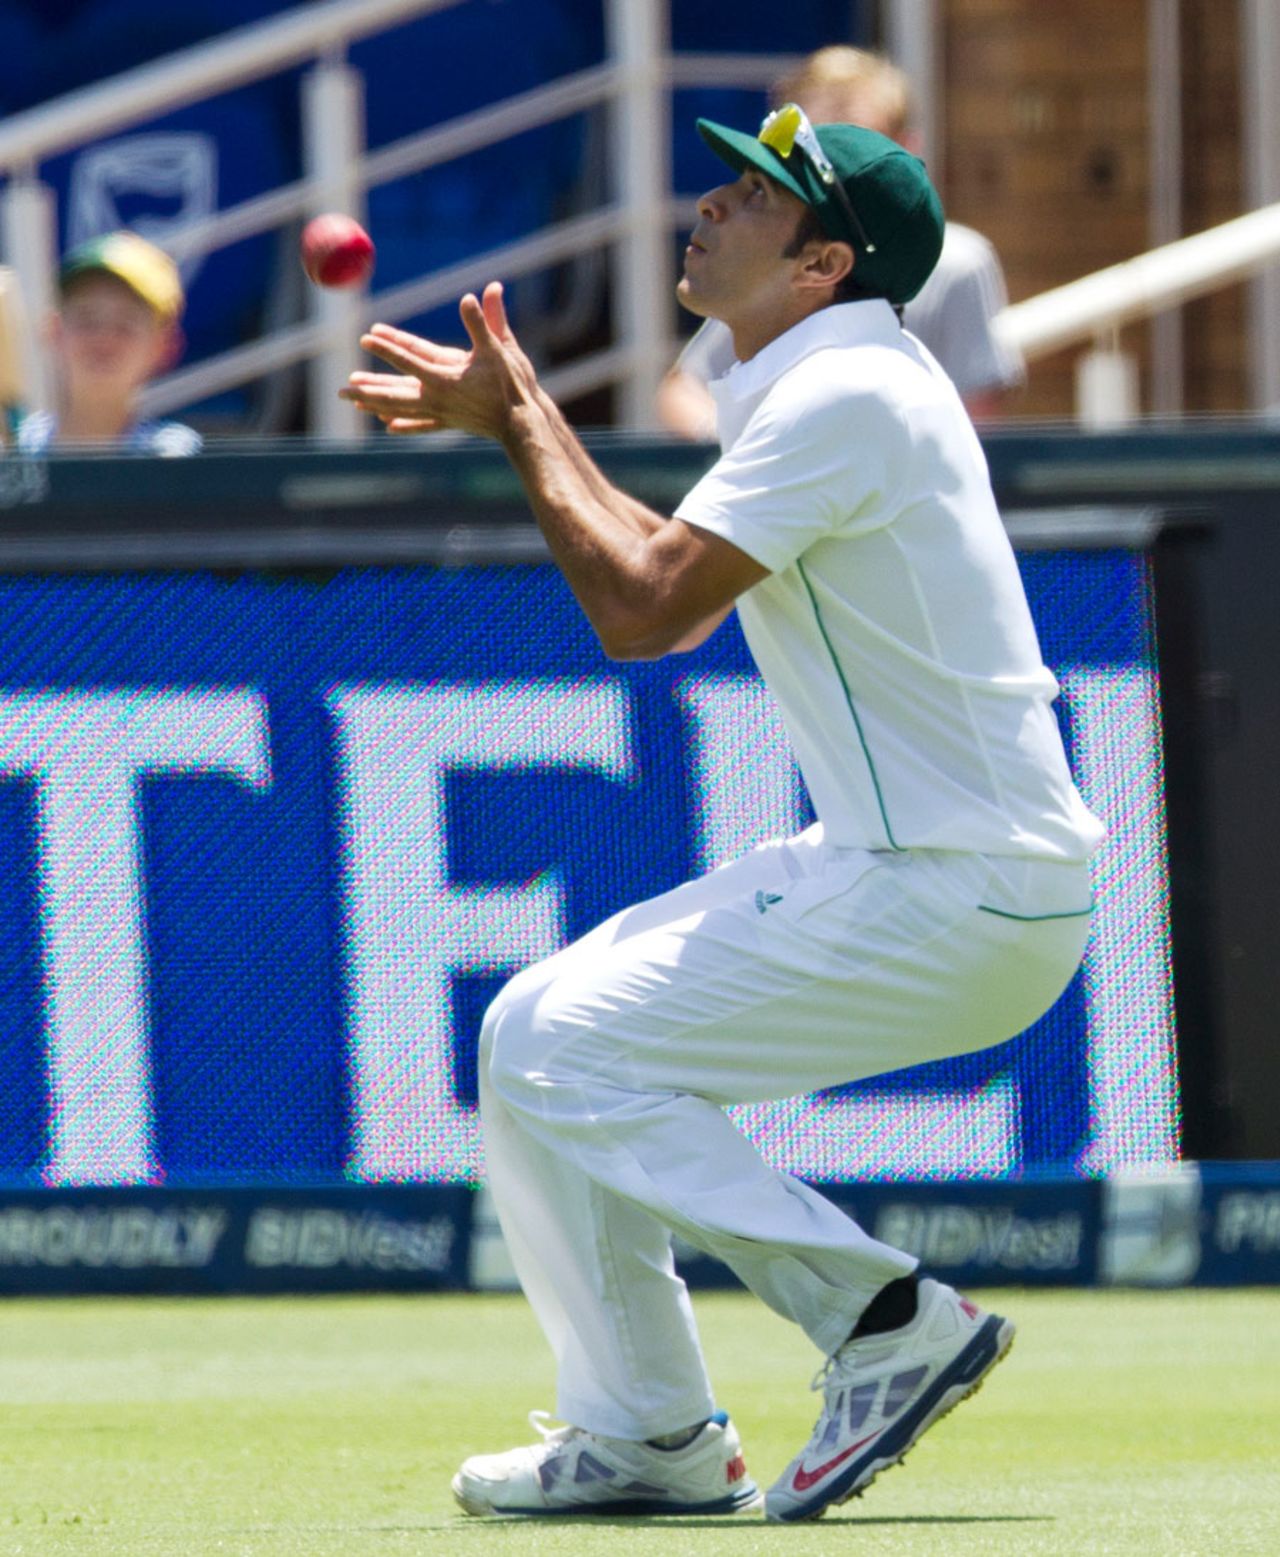 Imran Tahir steadies himself for a catch, South Africa v India, 1st Test, Johannesburg, 1st day, December 18, 2013